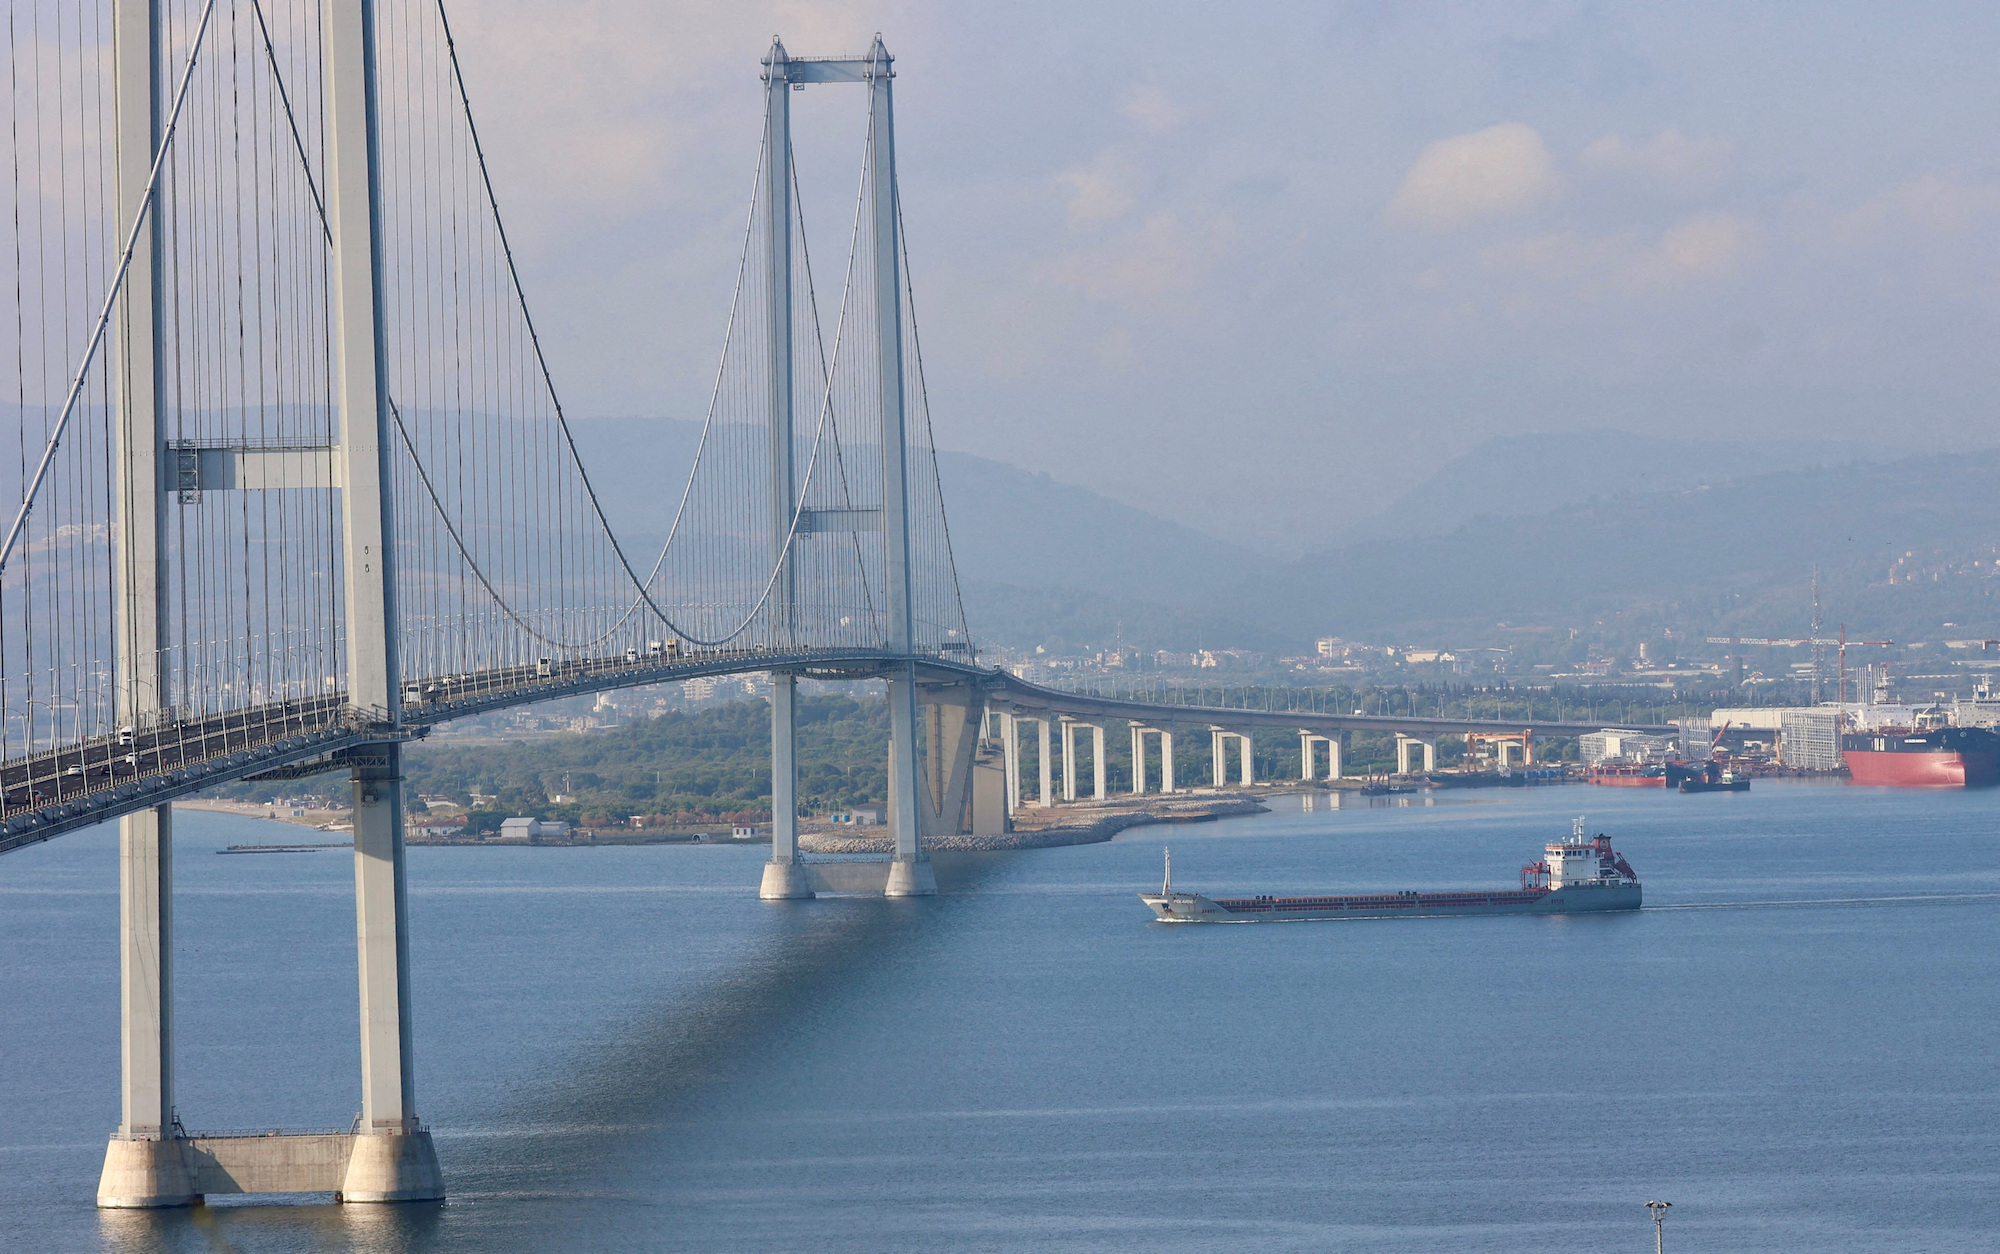 A Turkish-flagged cargo ship carrying Ukrainian grain enters the Gulf of Izmit in Turkey on August 8.